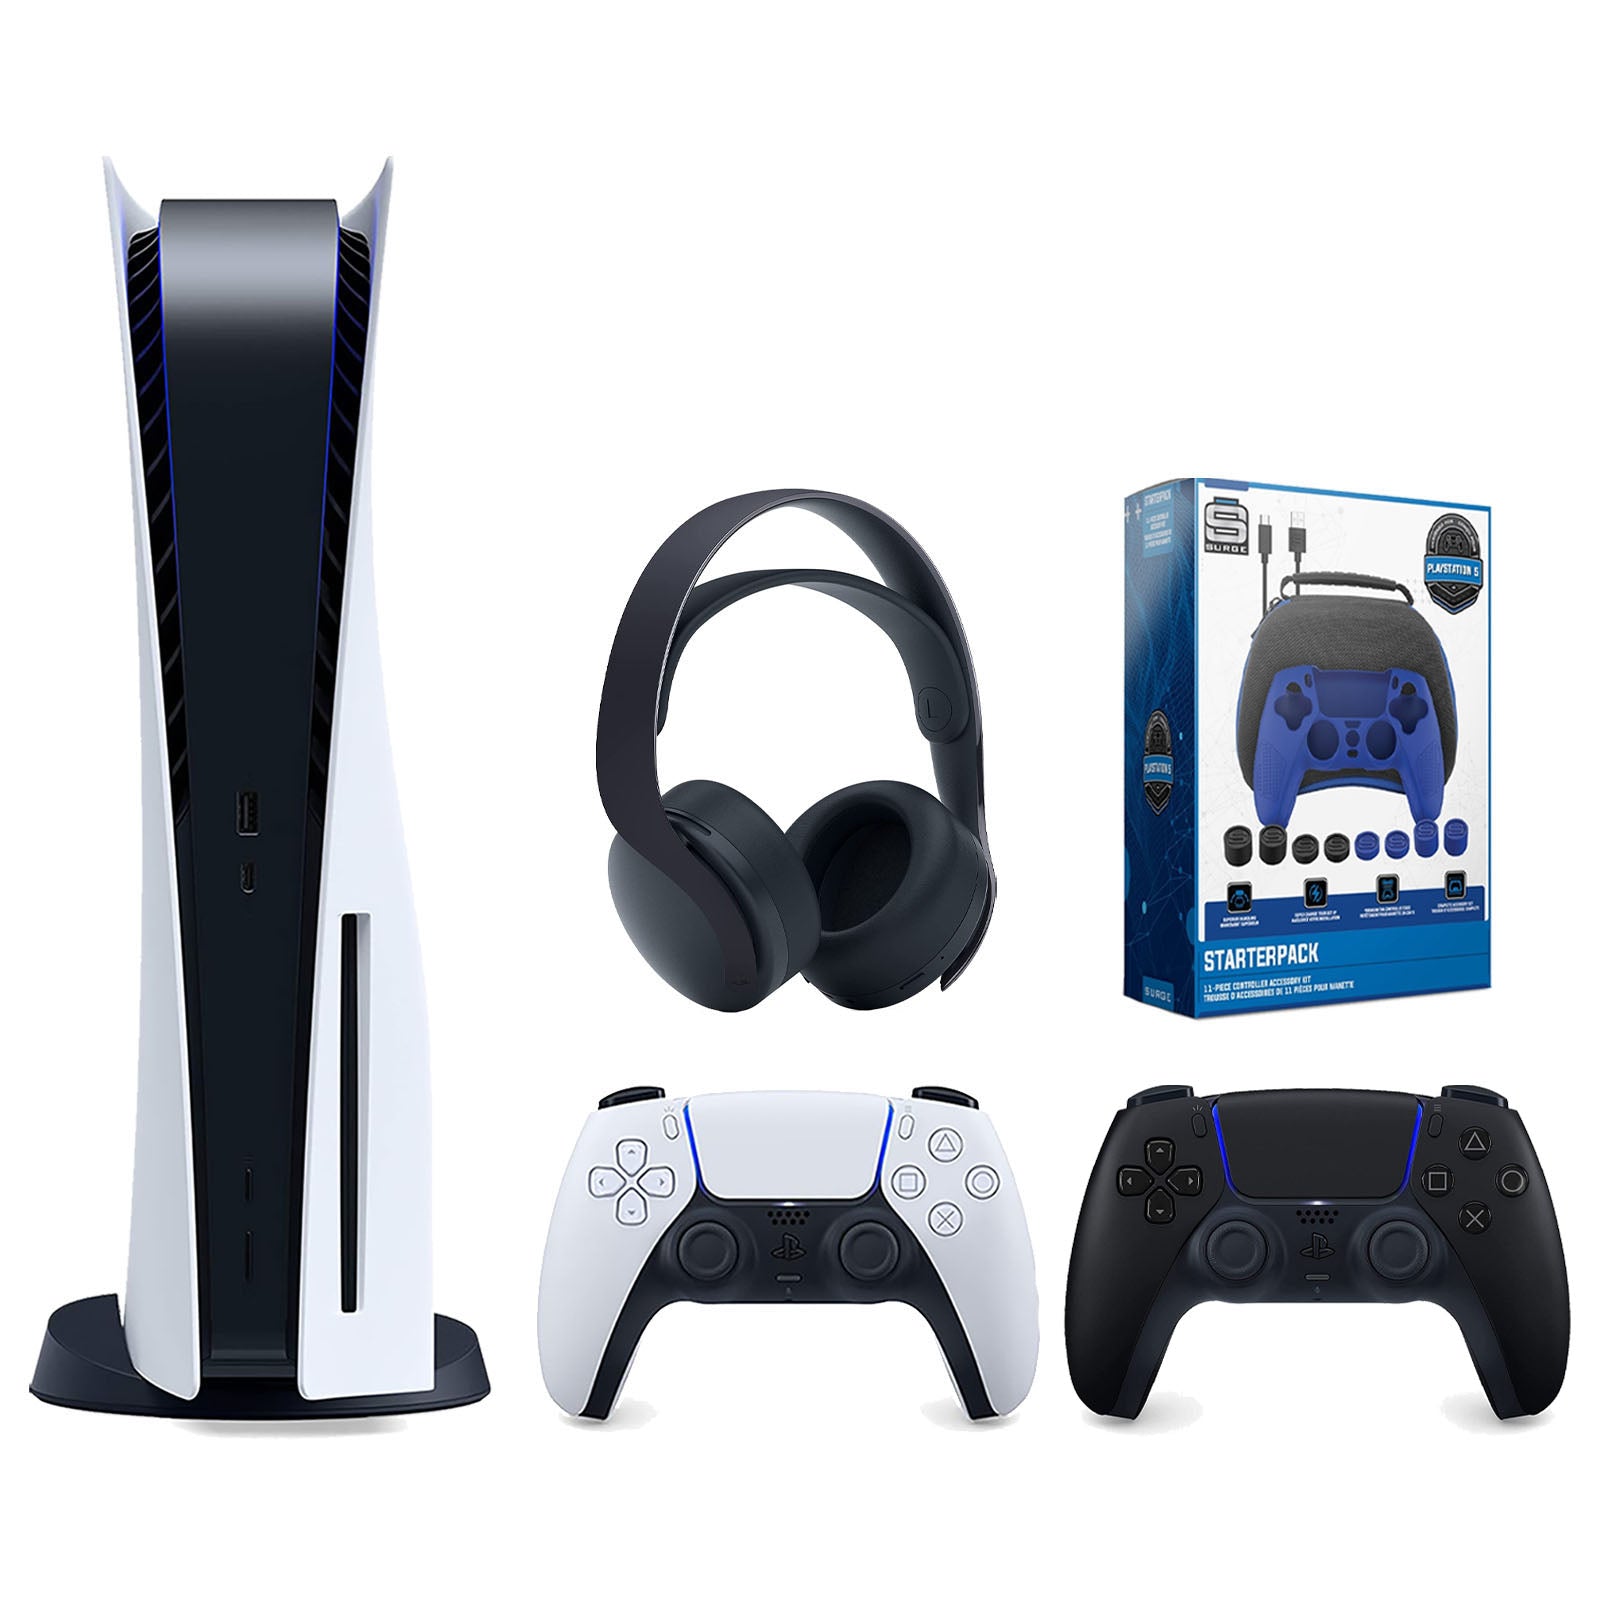 Sony Playstation 5 Disc Version Console with Extra Black Controller, Black PULSE 3D Headset and Surge Pro Gamer Starter Pack 11-Piece Accessory Bundle - Pro-Distributing